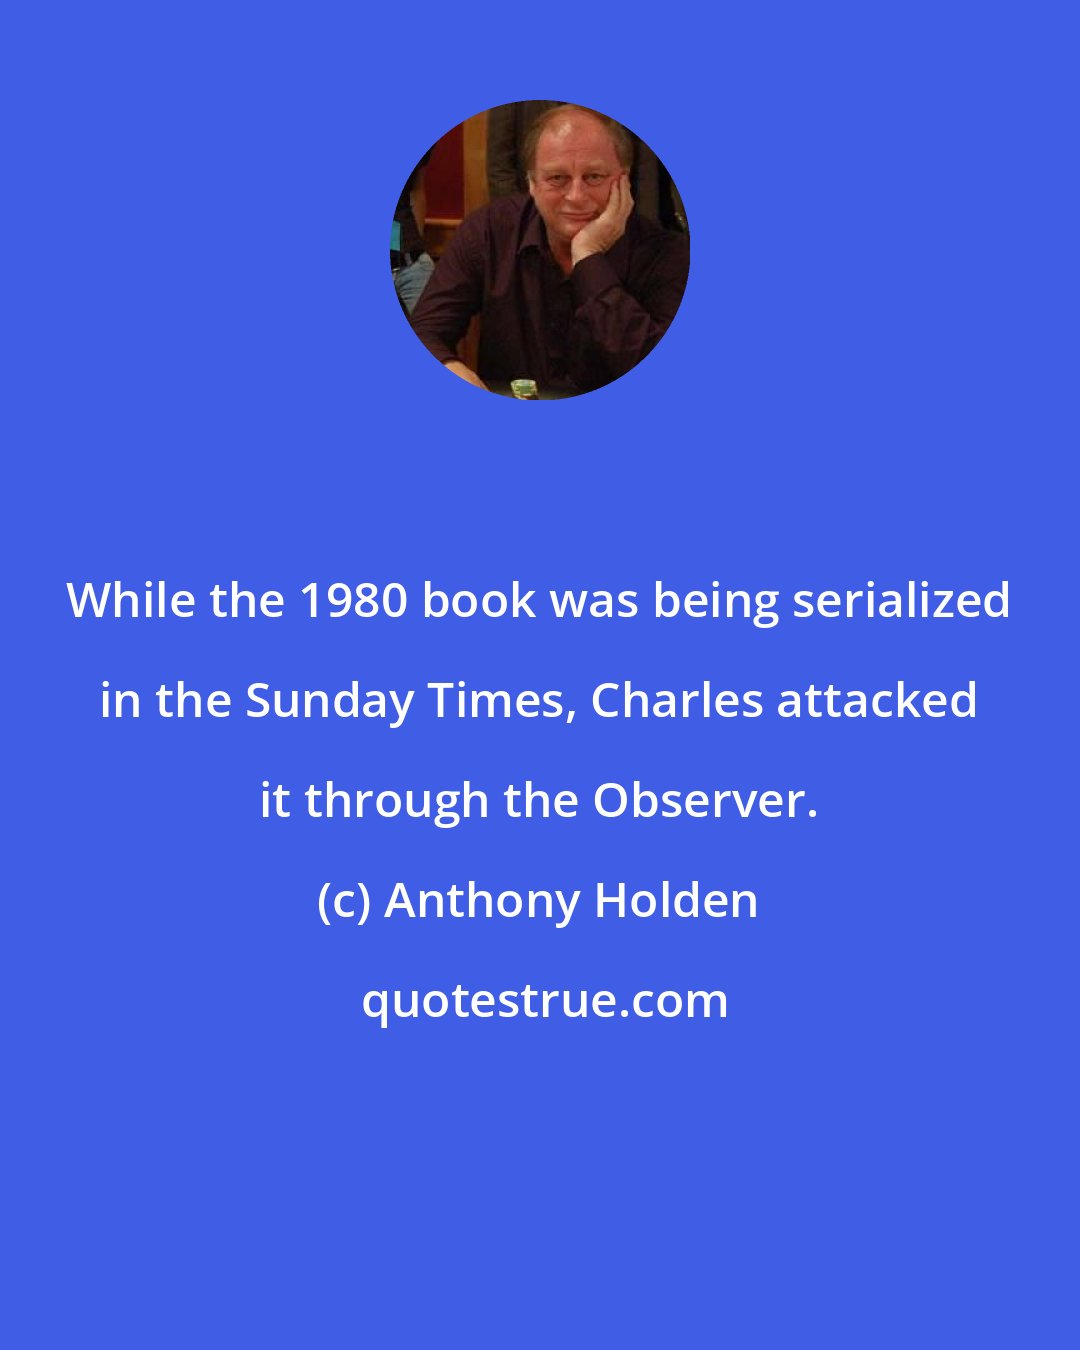 Anthony Holden: While the 1980 book was being serialized in the Sunday Times, Charles attacked it through the Observer.